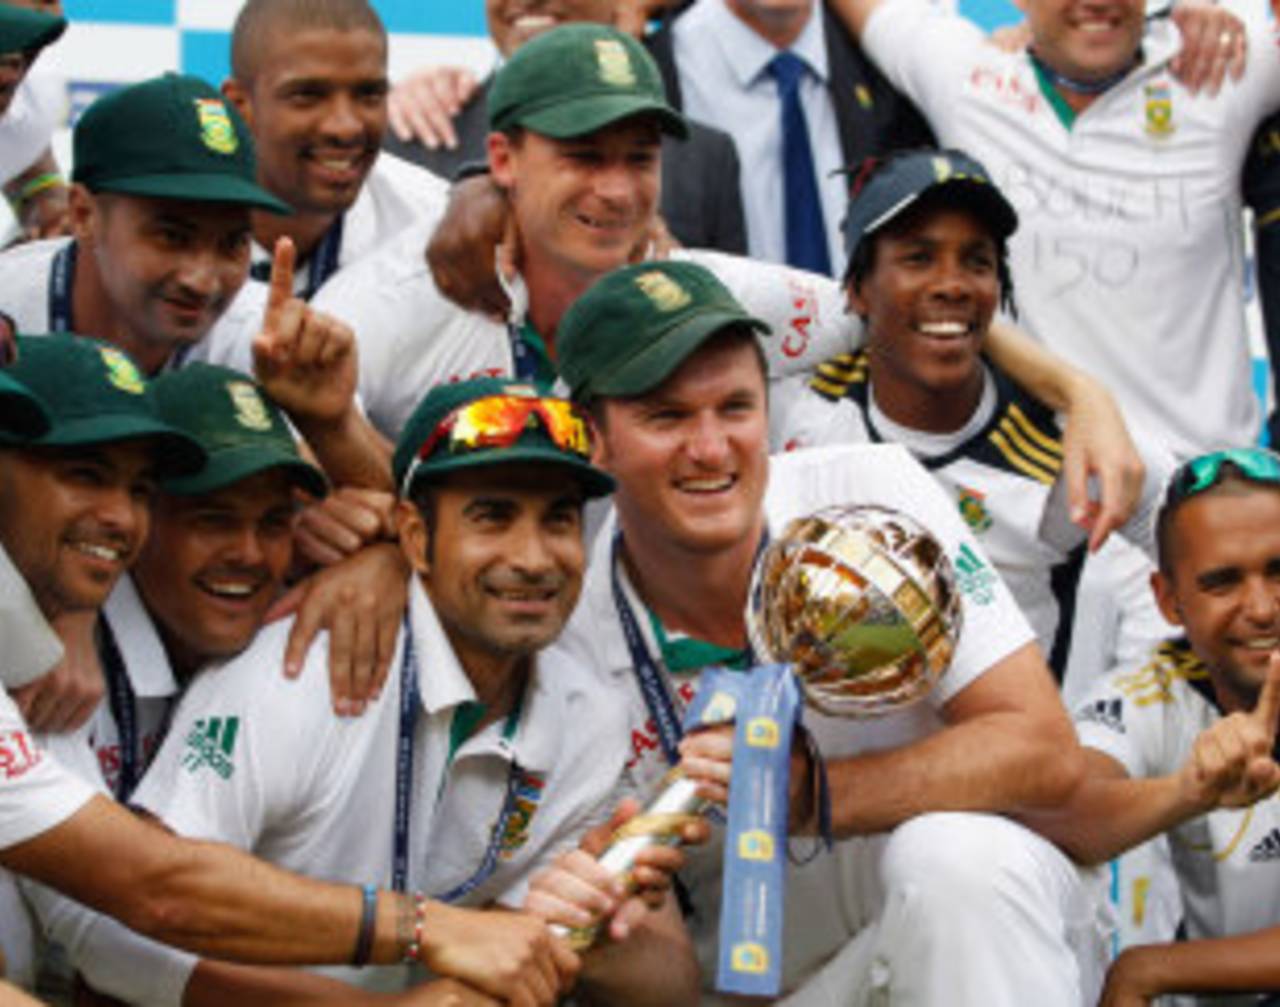 As South Africa's players celebrated, their coach Gary Kirsten was looking on proudly&nbsp;&nbsp;&bull;&nbsp;&nbsp;Getty Images